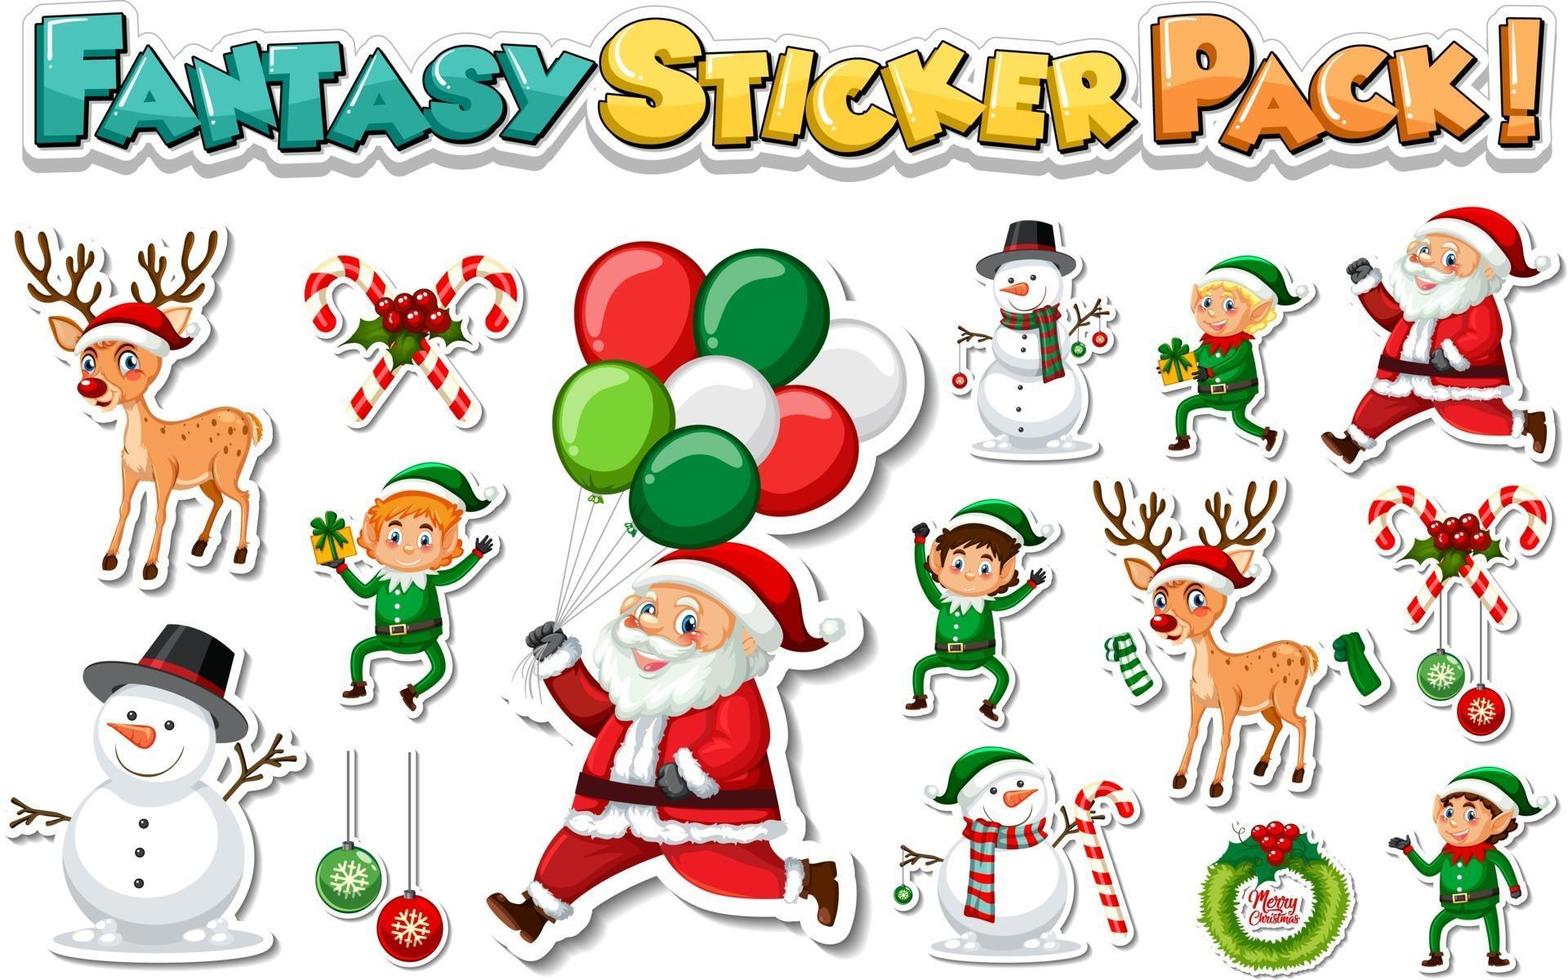 Sticker set with Santa Claus and Christmas objects vector